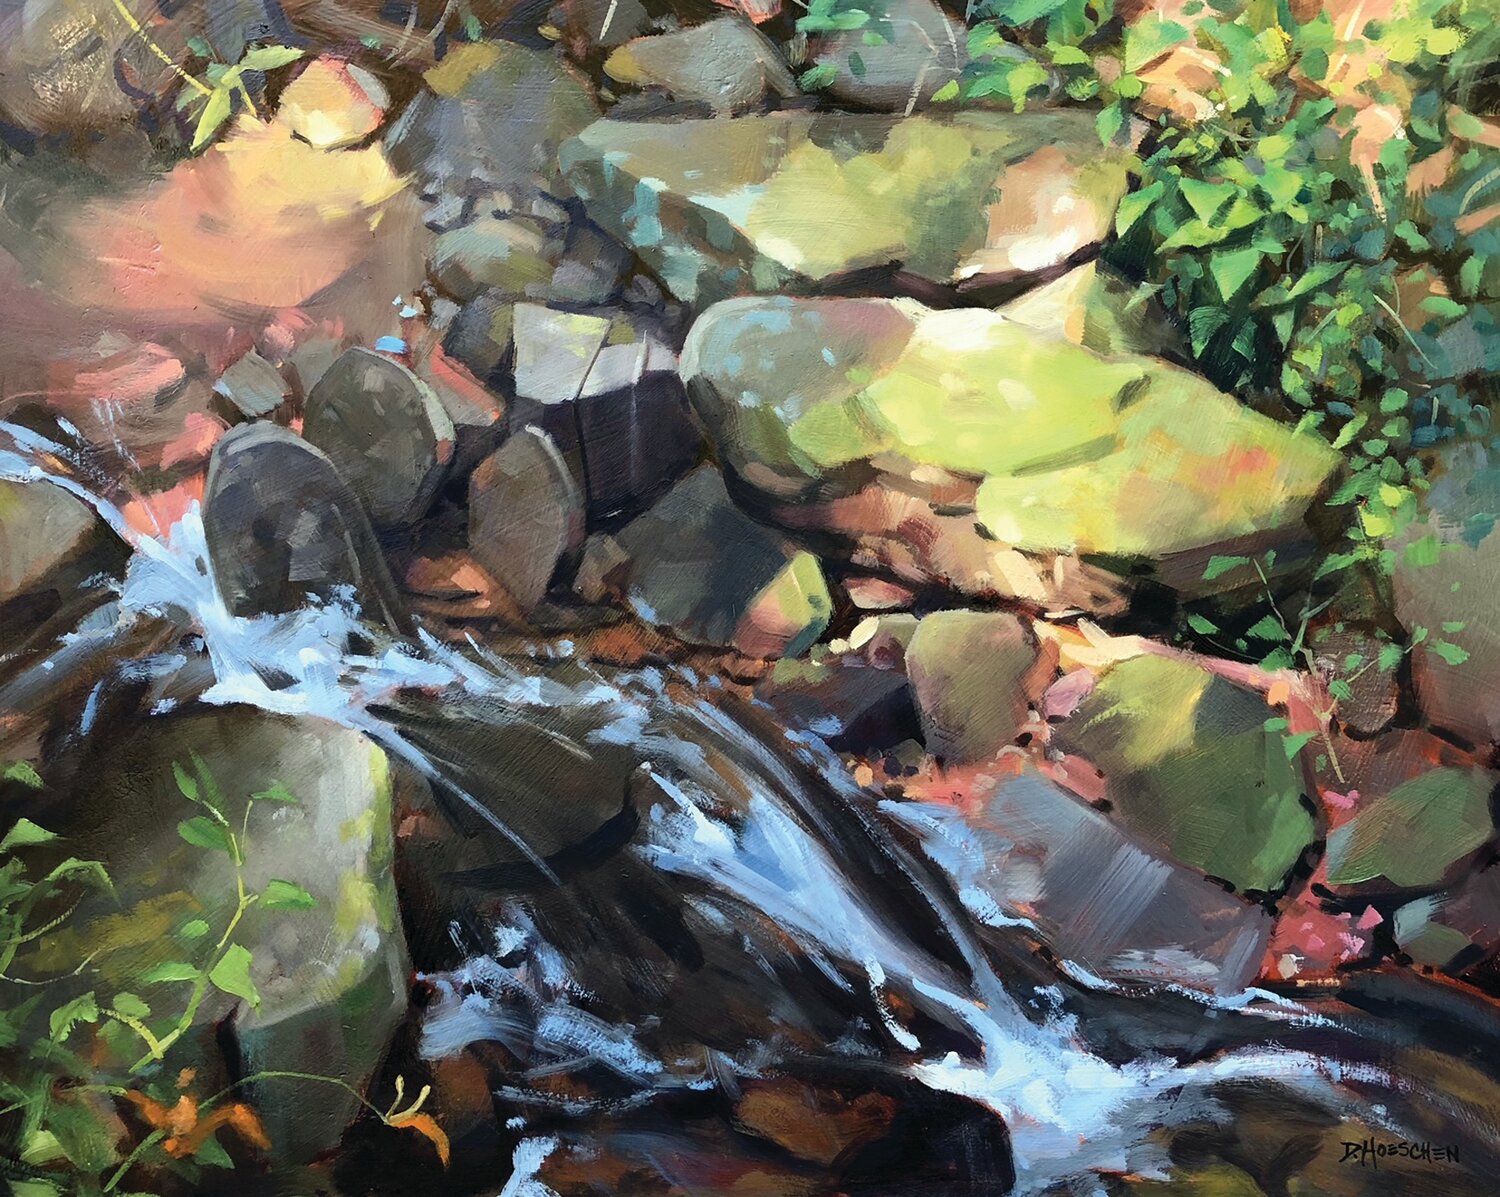 “Forest Floor” is an oil painting by Dorothy Hoeschen.